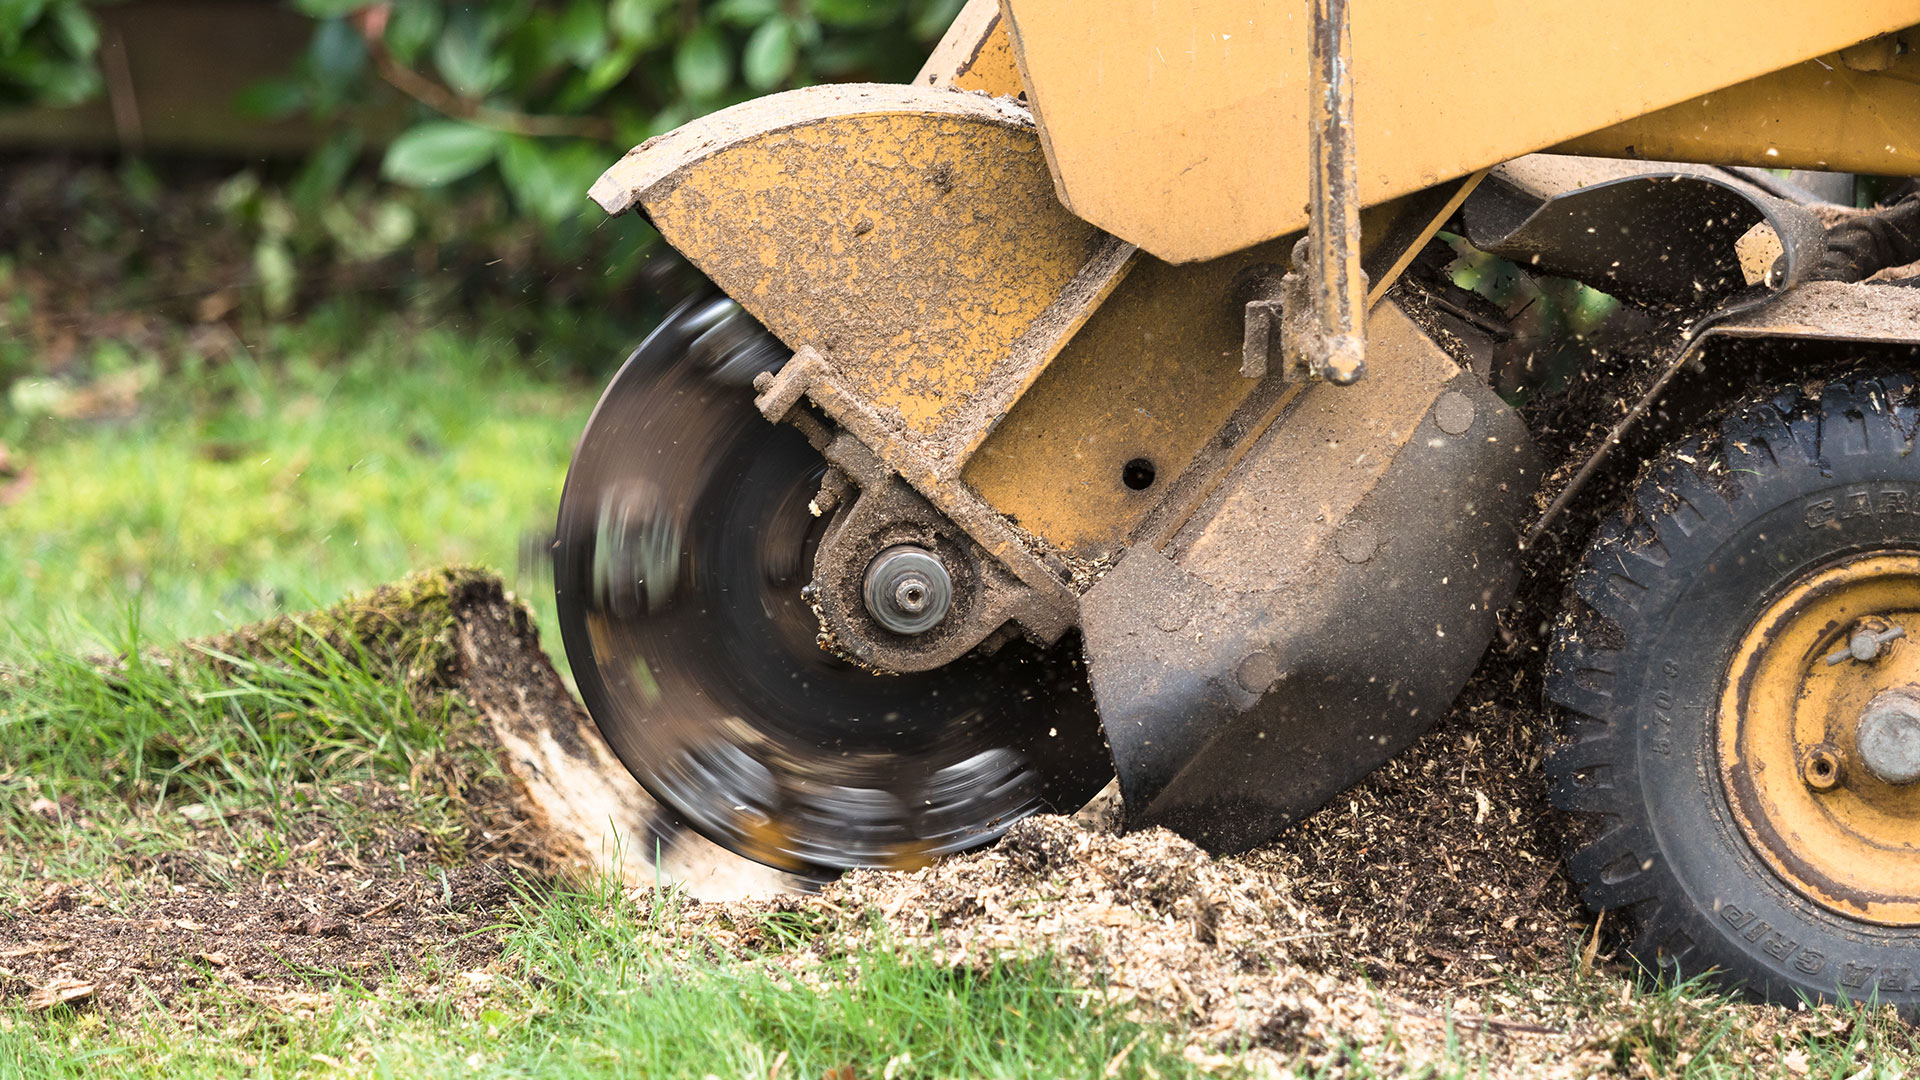 Stump Removal vs Stump Grinding - Which One Is Better?